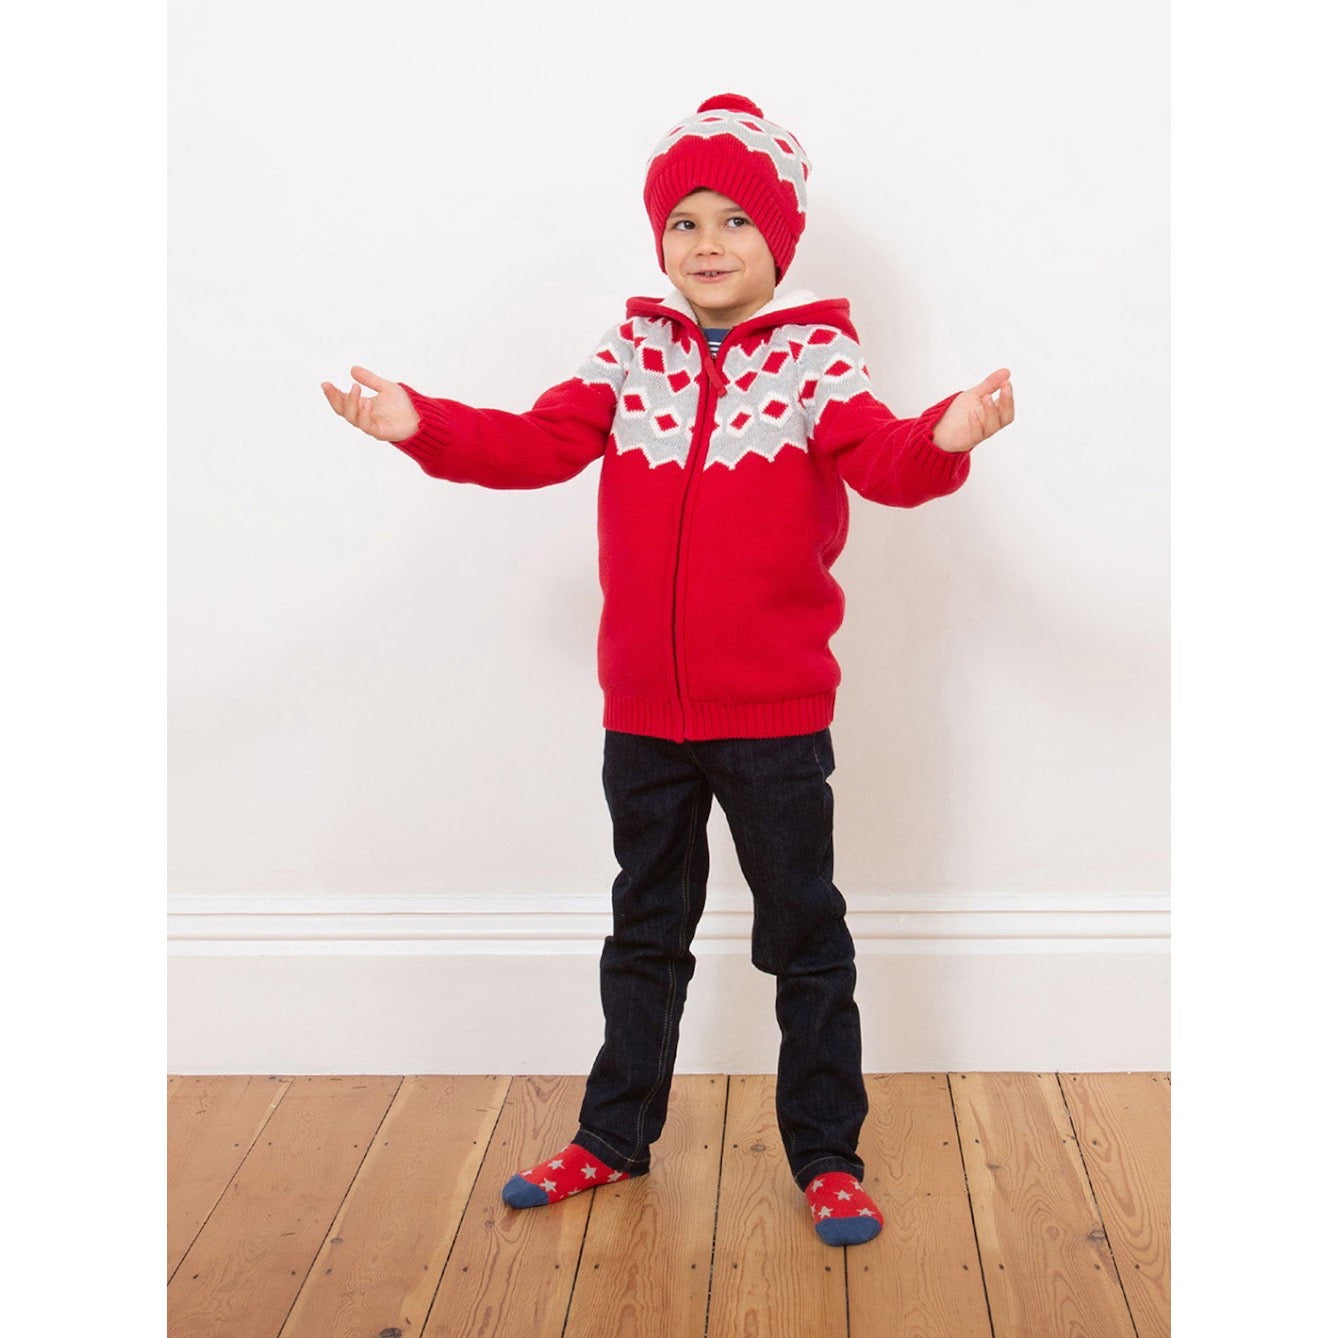 Kite Jurassic Cosy Hat 5649 Red Clothing 0-12M / Red,1-3 YRS / Red,3-6YRS / Red,6-9YRS / Red